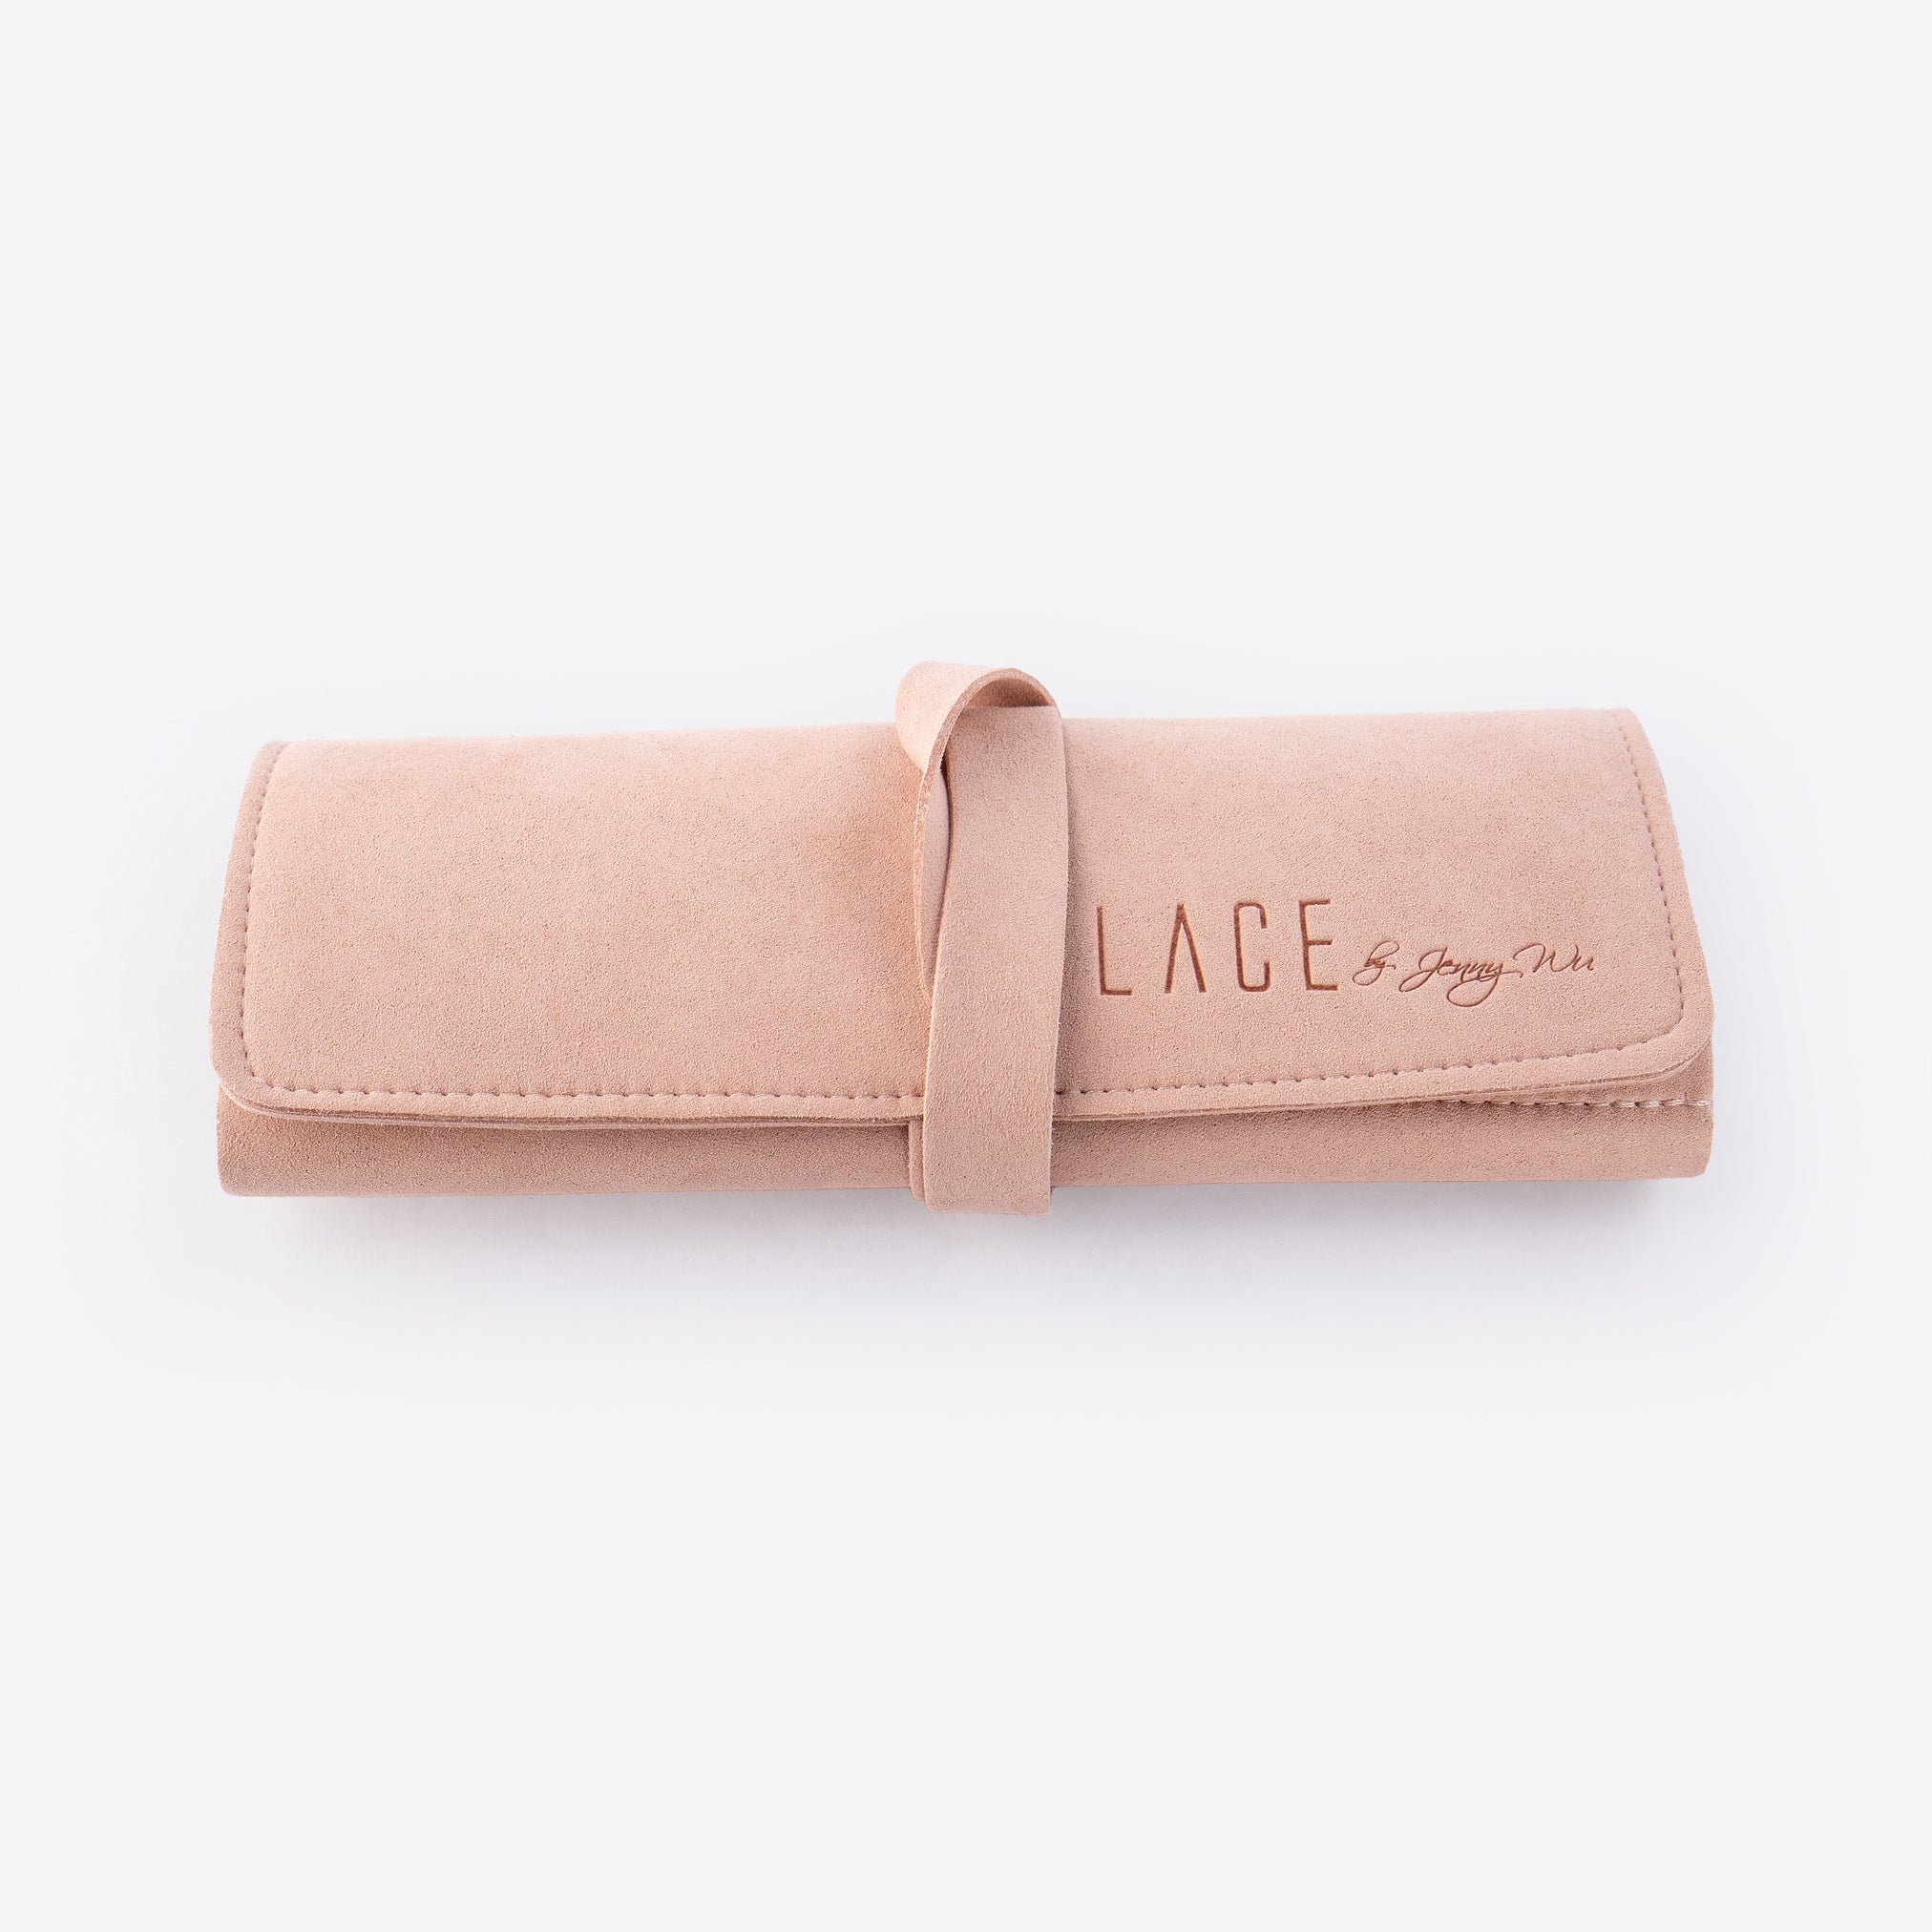 Travel Jewelry Roll – LACE by JennyWu